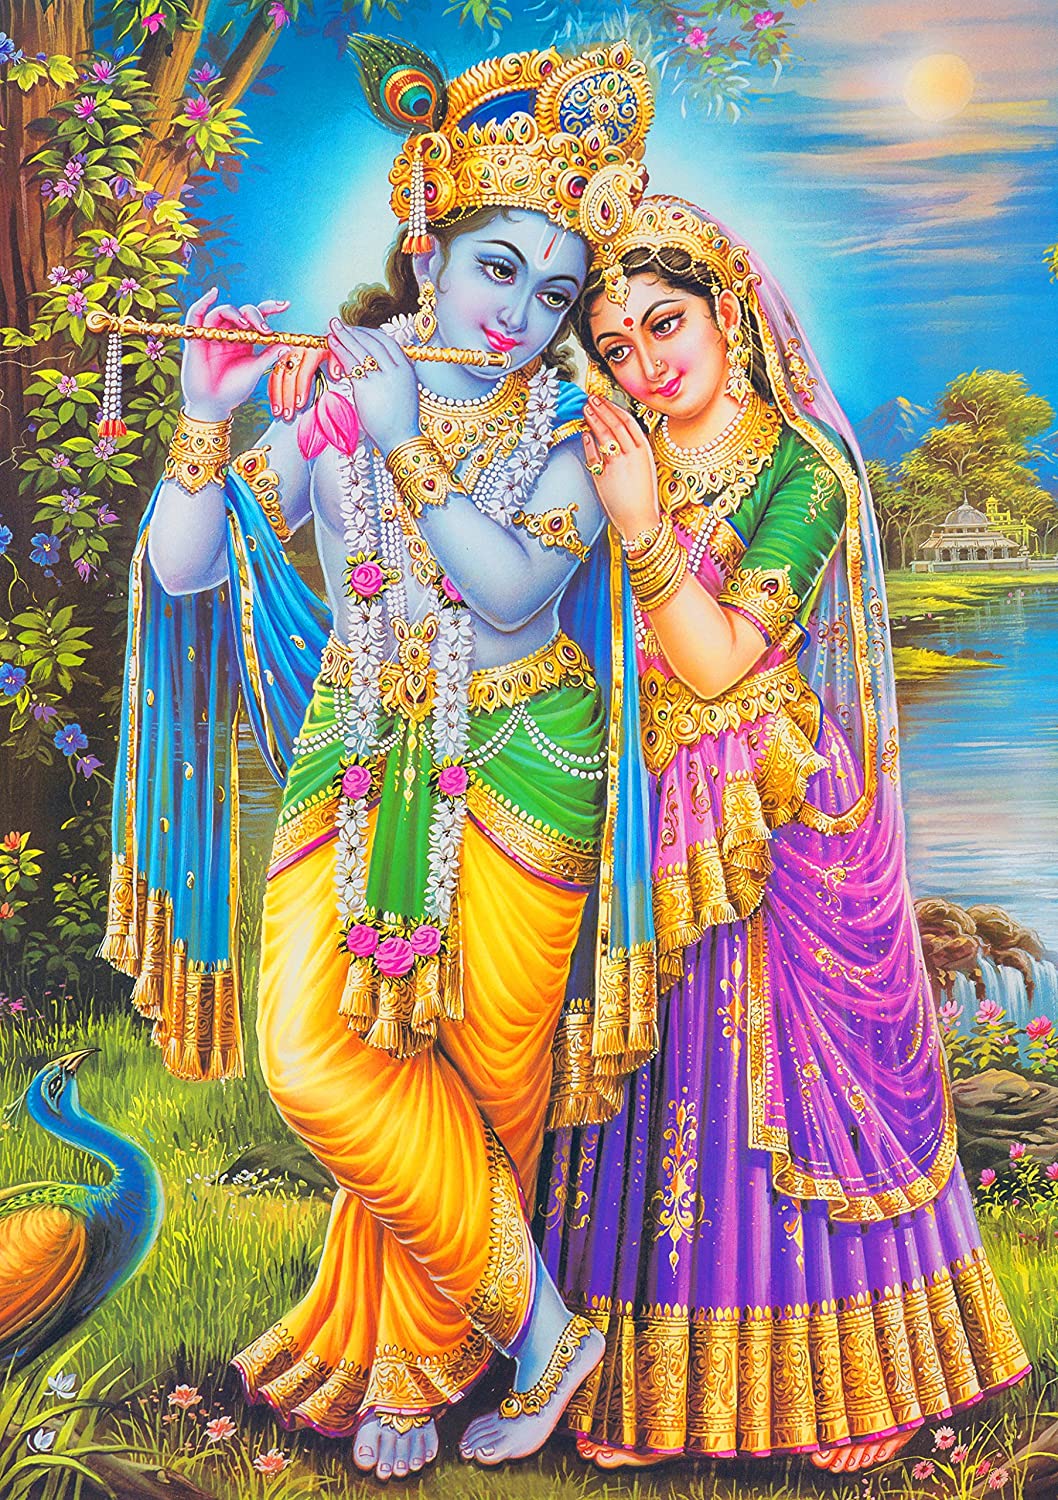 Lord Krishna Radha Poster A3 Picture India Hindu Indian Print Wall Art Image Oriental Art Painting: Posters & Prints